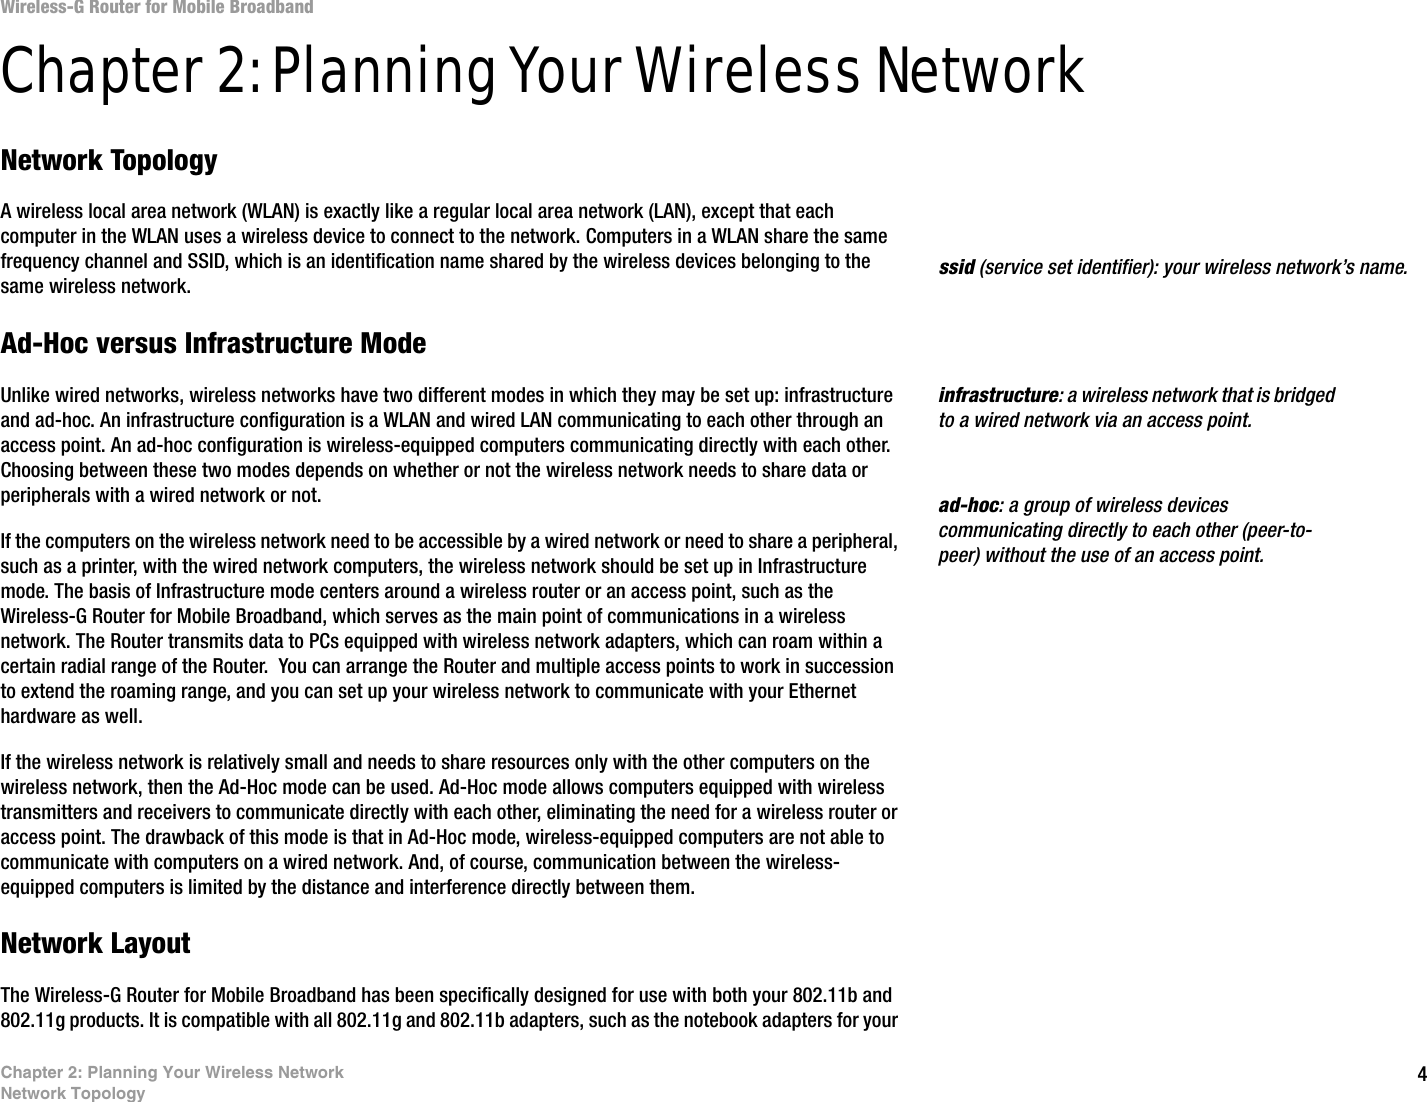 4Chapter 2: Planning Your Wireless NetworkNetwork TopologyWireless-G Router for Mobile BroadbandChapter 2: Planning Your Wireless NetworkNetwork TopologyA wireless local area network (WLAN) is exactly like a regular local area network (LAN), except that each computer in the WLAN uses a wireless device to connect to the network. Computers in a WLAN share the same frequency channel and SSID, which is an identification name shared by the wireless devices belonging to the same wireless network.Ad-Hoc versus Infrastructure ModeUnlike wired networks, wireless networks have two different modes in which they may be set up: infrastructure and ad-hoc. An infrastructure configuration is a WLAN and wired LAN communicating to each other through an access point. An ad-hoc configuration is wireless-equipped computers communicating directly with each other. Choosing between these two modes depends on whether or not the wireless network needs to share data or peripherals with a wired network or not. If the computers on the wireless network need to be accessible by a wired network or need to share a peripheral, such as a printer, with the wired network computers, the wireless network should be set up in Infrastructure mode. The basis of Infrastructure mode centers around a wireless router or an access point, such as the Wireless-G Router for Mobile Broadband, which serves as the main point of communications in a wireless network. The Router transmits data to PCs equipped with wireless network adapters, which can roam within a certain radial range of the Router.  You can arrange the Router and multiple access points to work in succession to extend the roaming range, and you can set up your wireless network to communicate with your Ethernet hardware as well. If the wireless network is relatively small and needs to share resources only with the other computers on the wireless network, then the Ad-Hoc mode can be used. Ad-Hoc mode allows computers equipped with wireless transmitters and receivers to communicate directly with each other, eliminating the need for a wireless router or access point. The drawback of this mode is that in Ad-Hoc mode, wireless-equipped computers are not able to communicate with computers on a wired network. And, of course, communication between the wireless-equipped computers is limited by the distance and interference directly between them. Network LayoutThe Wireless-G Router for Mobile Broadband has been specifically designed for use with both your 802.11b and 802.11g products. It is compatible with all 802.11g and 802.11b adapters, such as the notebook adapters for your infrastructure: a wireless network that is bridged to a wired network via an access point.ssid (service set identifier): your wireless network’s name.ad-hoc: a group of wireless devices communicating directly to each other (peer-to-peer) without the use of an access point.